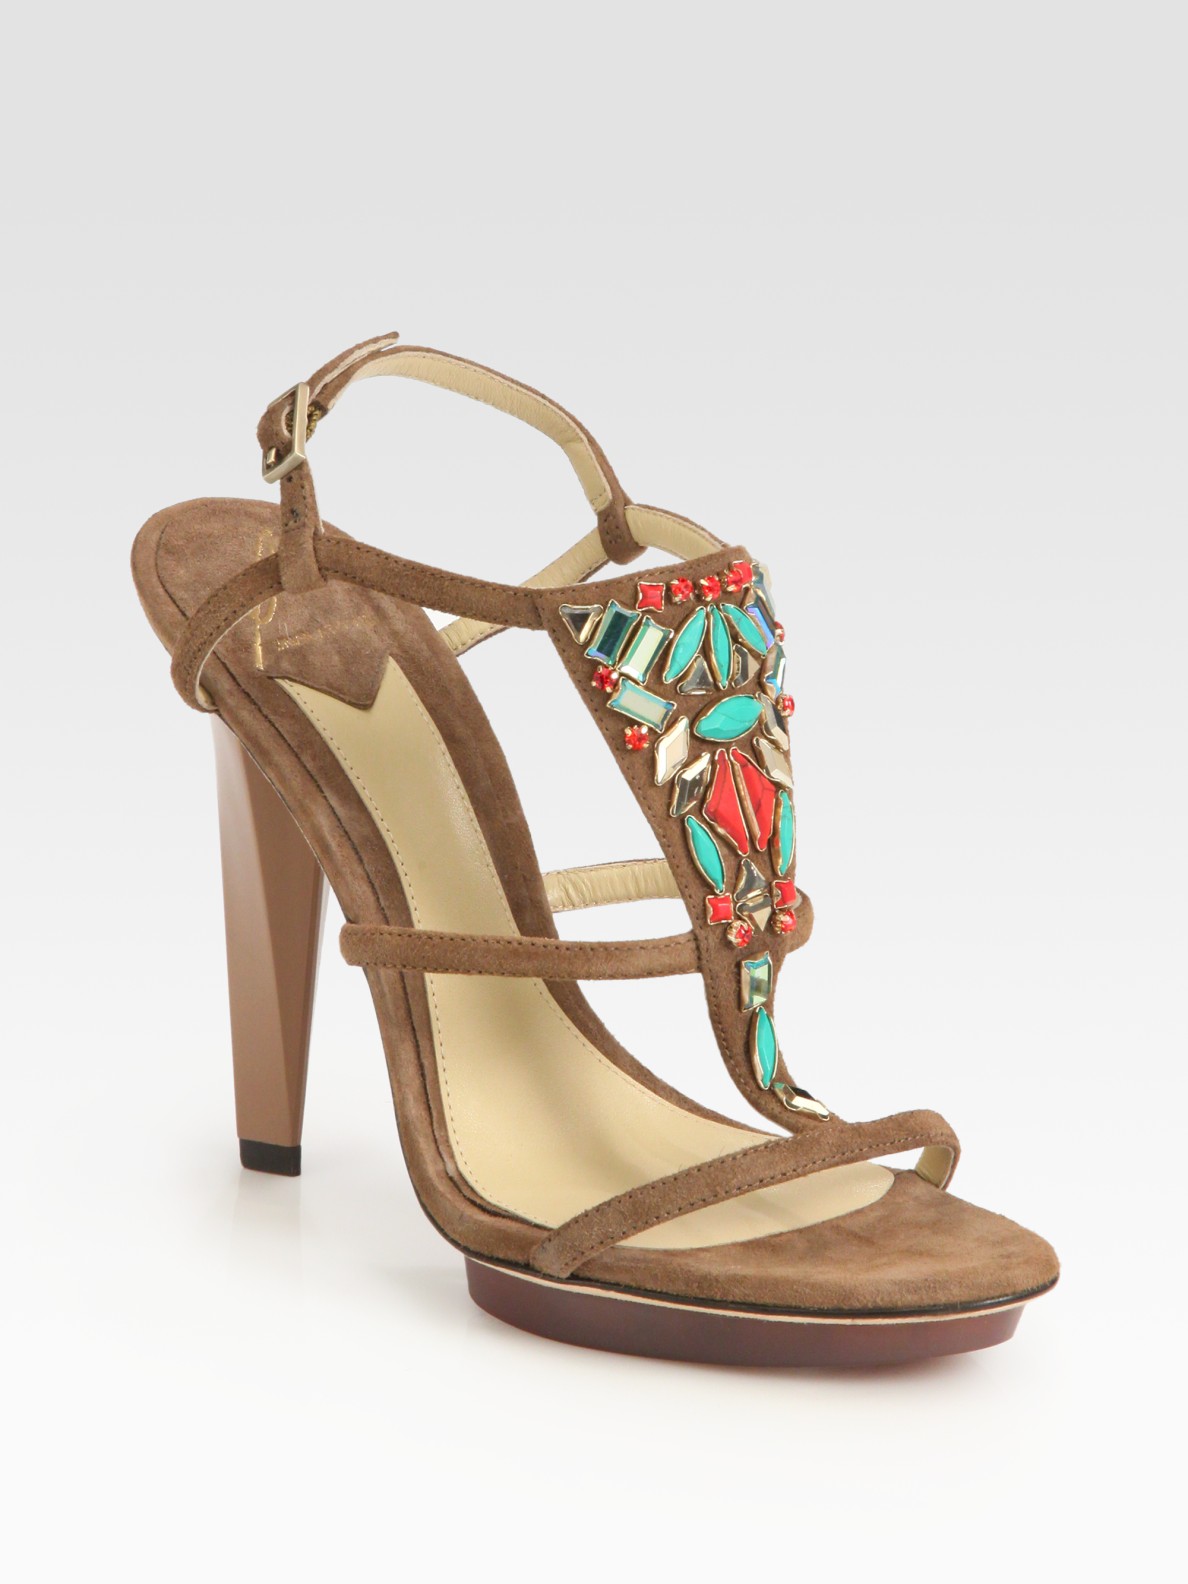 B brian atwood Donosa Jewelembellished Suede Platform Sandals in ...